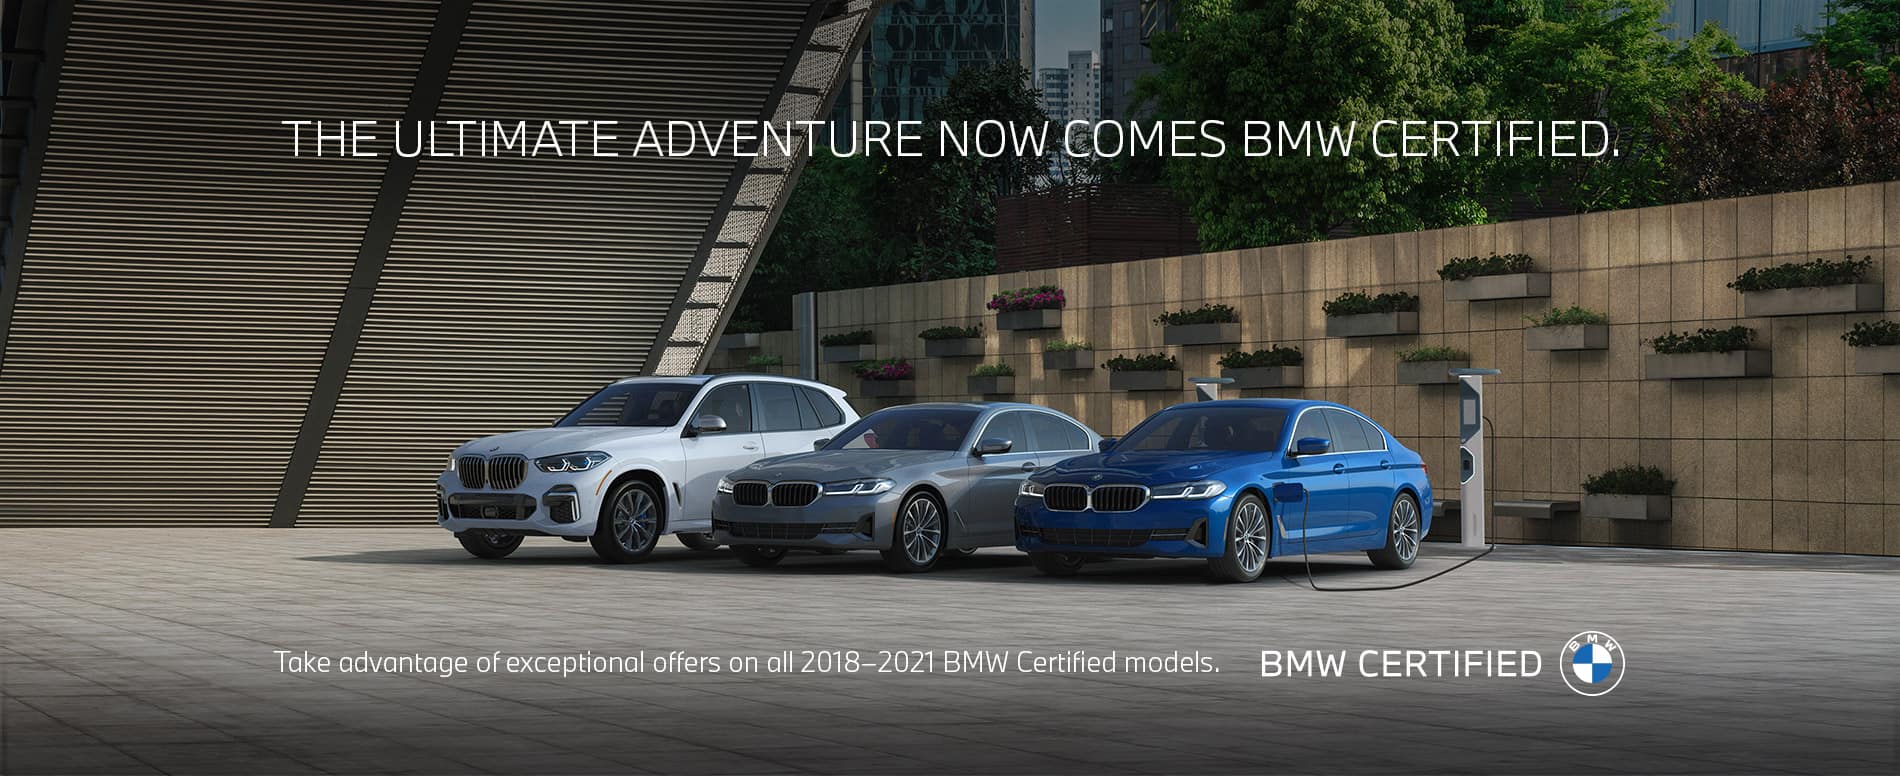 Offers on all 2018 - 2021 BMW Certified models.